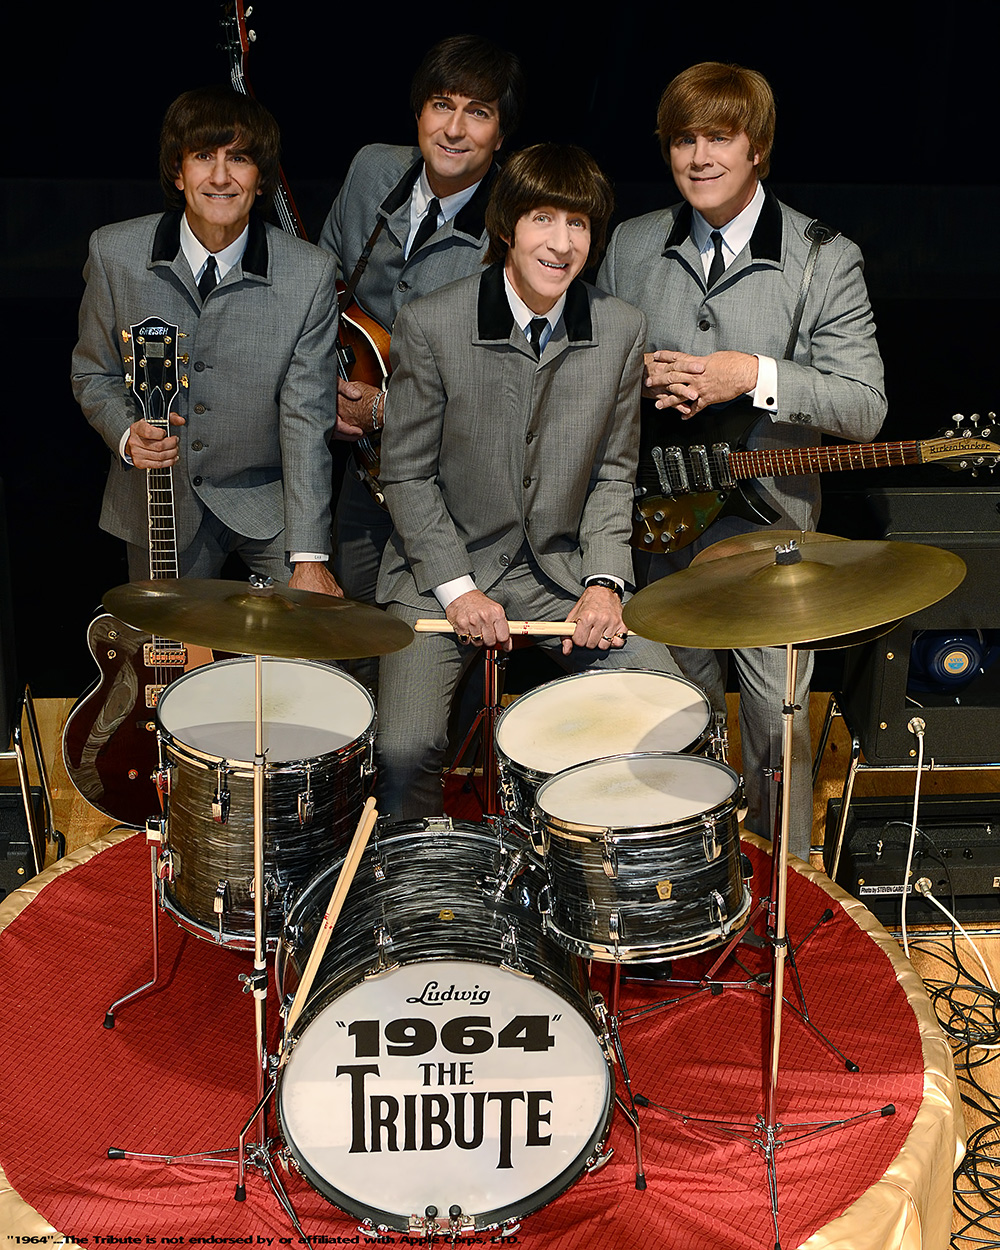 1964 The Tribute – The Palace Theatre